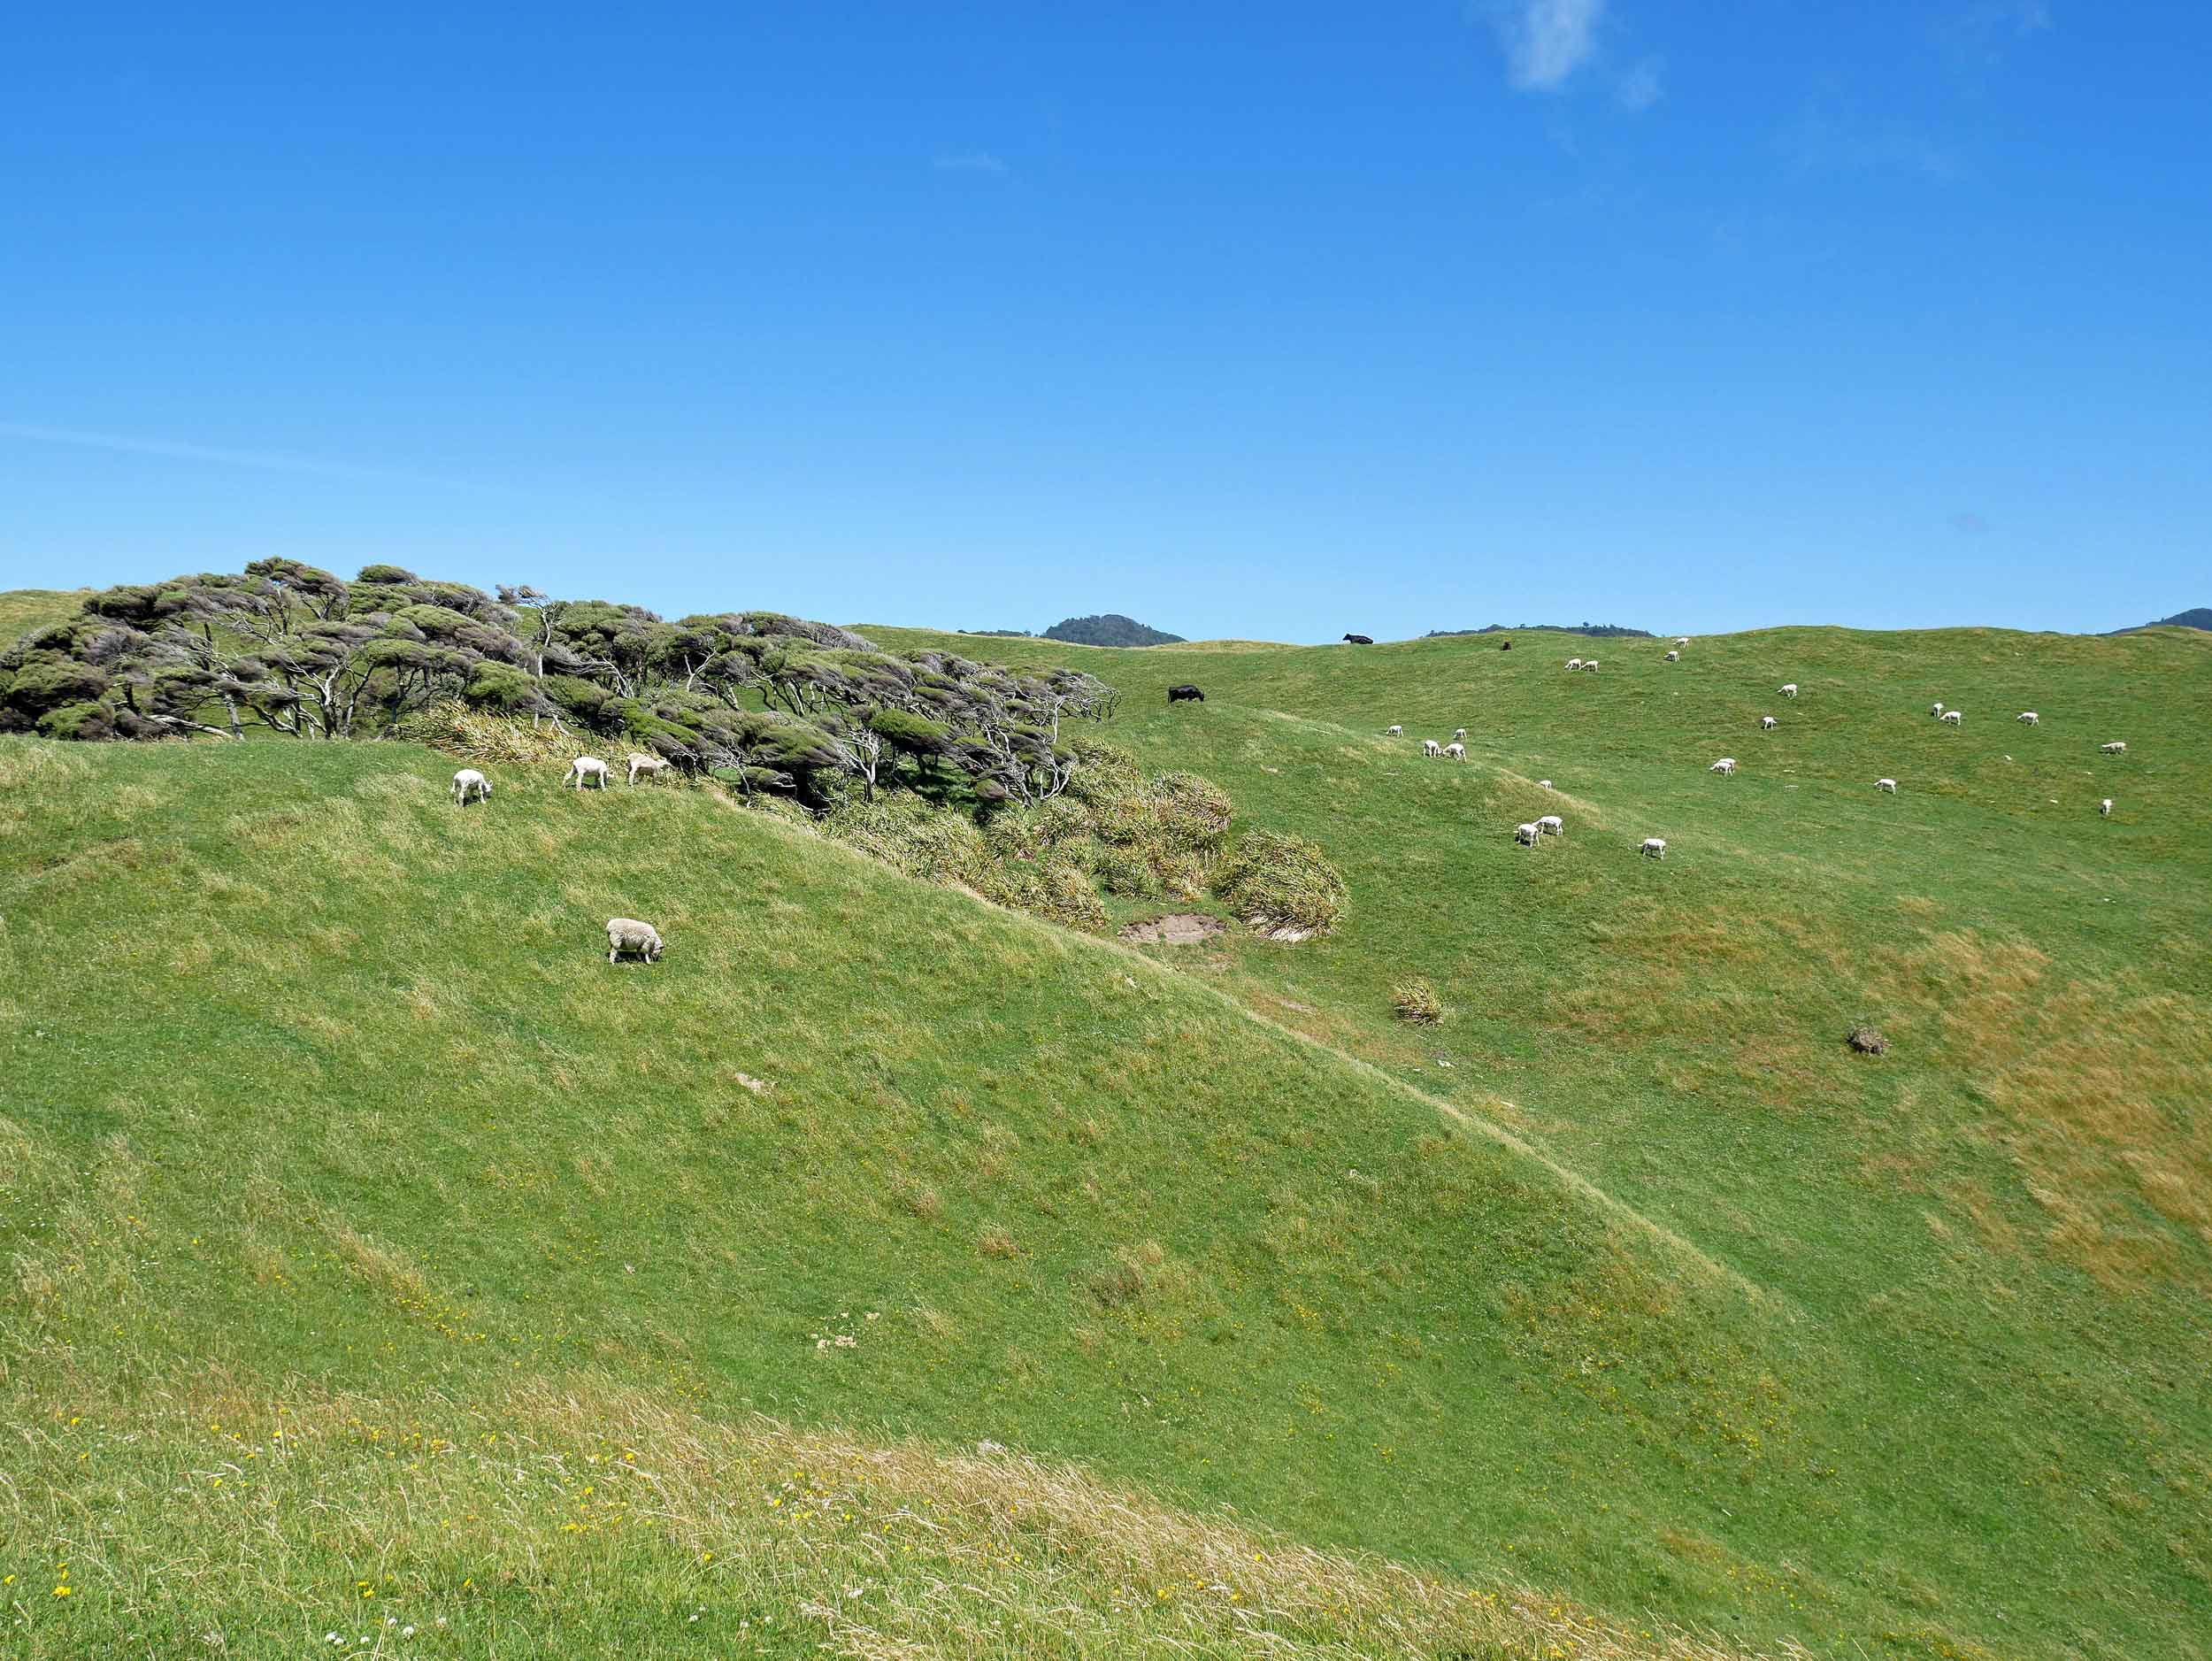  The northern most tip of the South Island, the rolling hills on top of hills are dotted with what else... more sheep (Jan 13). &nbsp; 